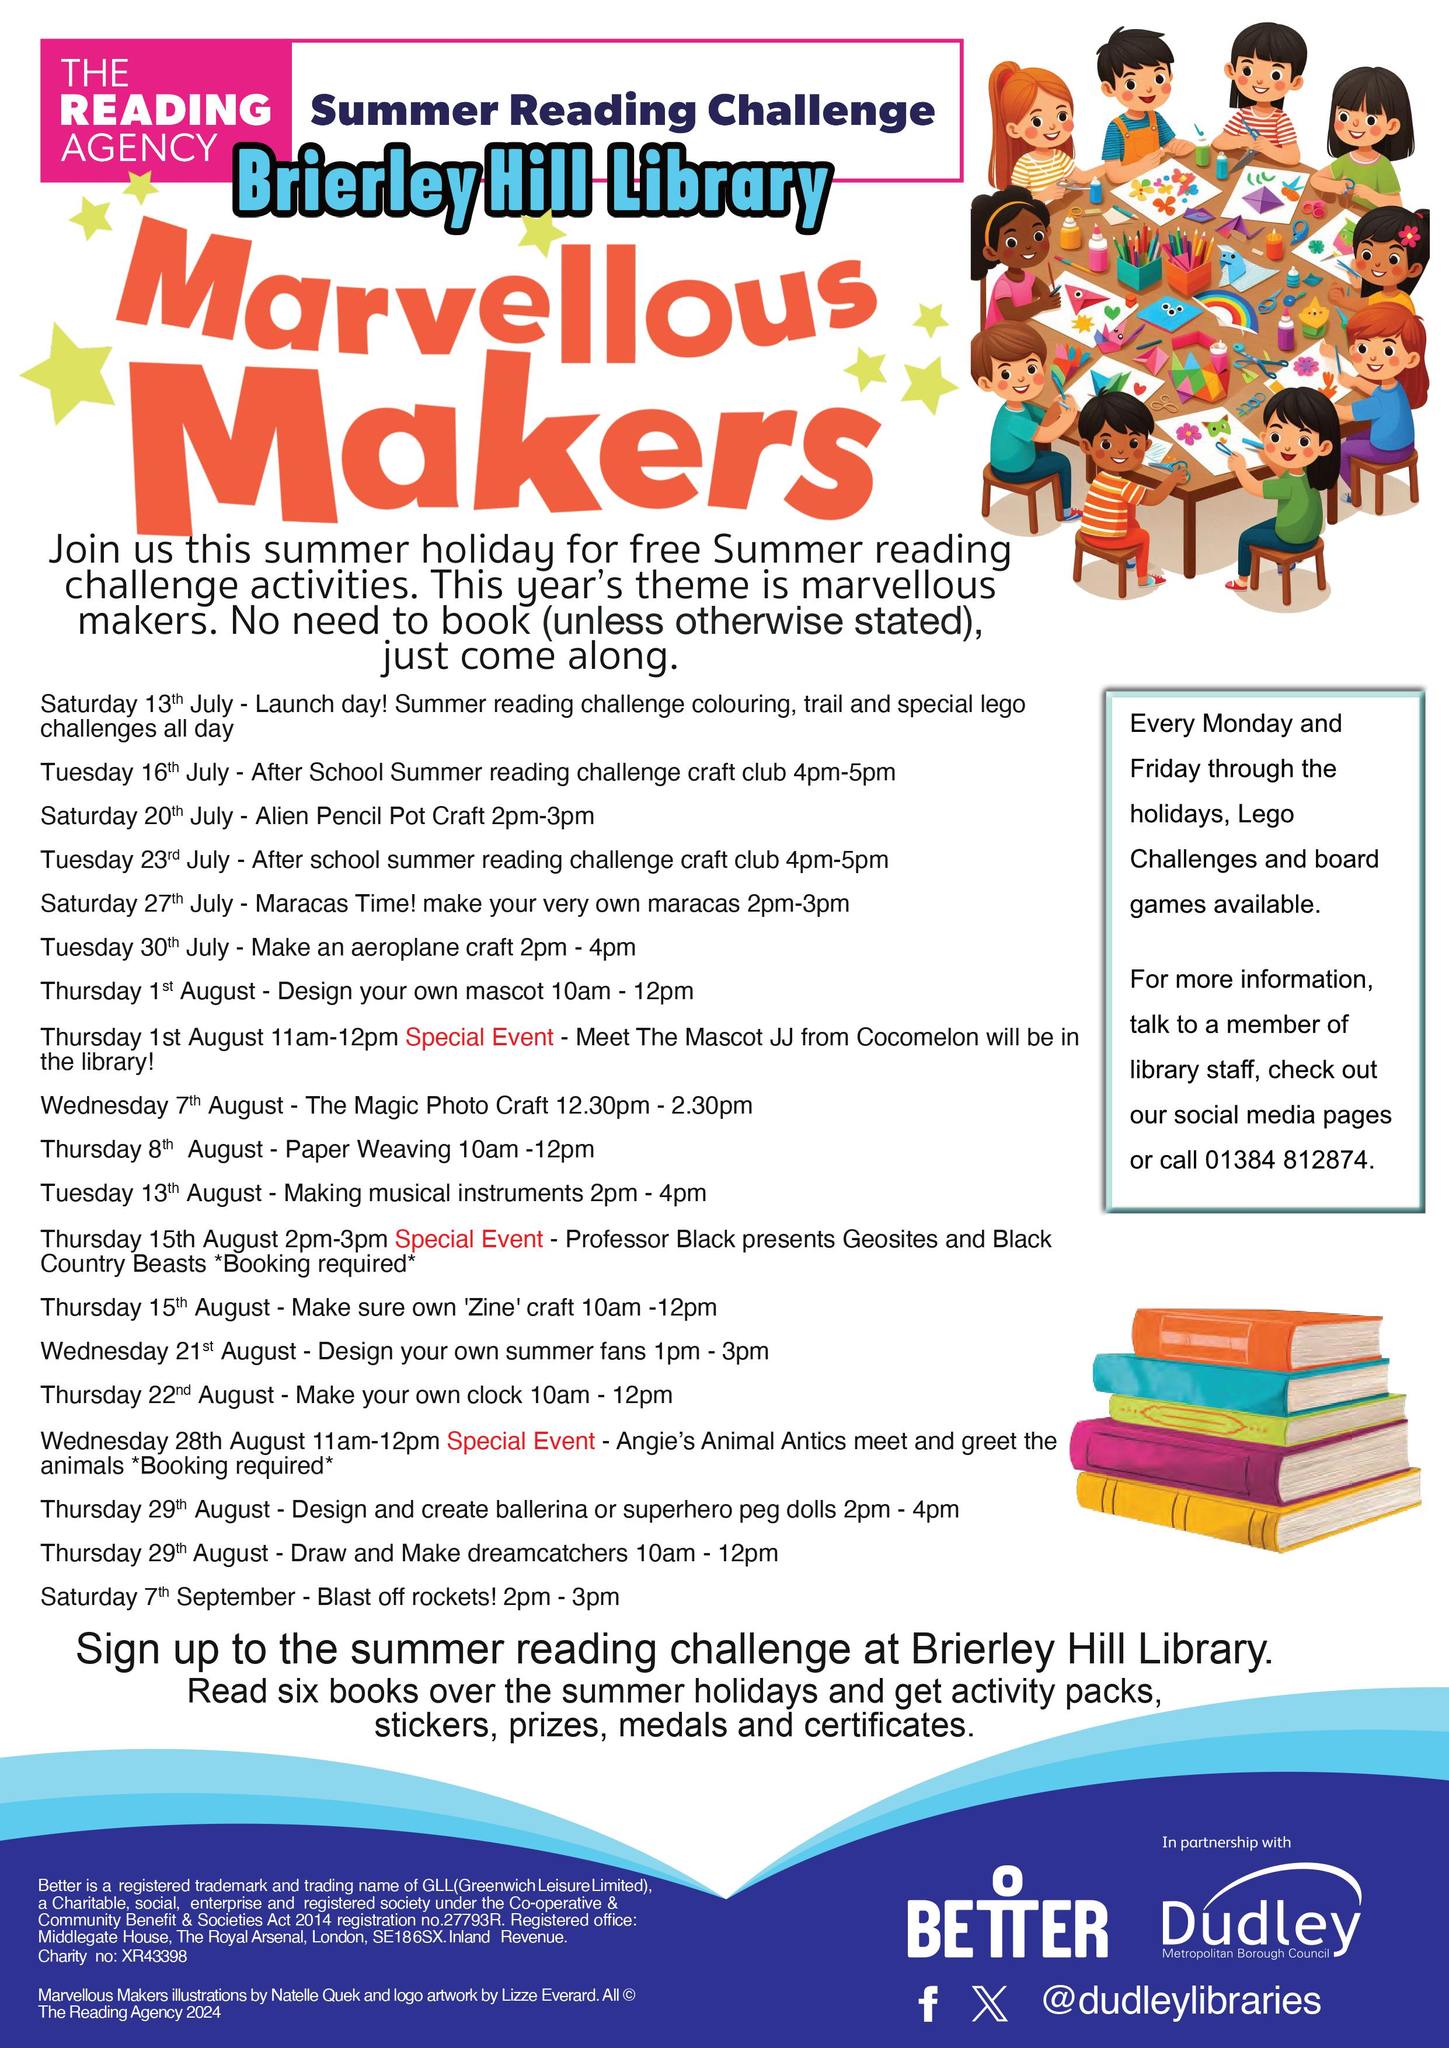 Brierley Hill Library - Paper Weaving Craft